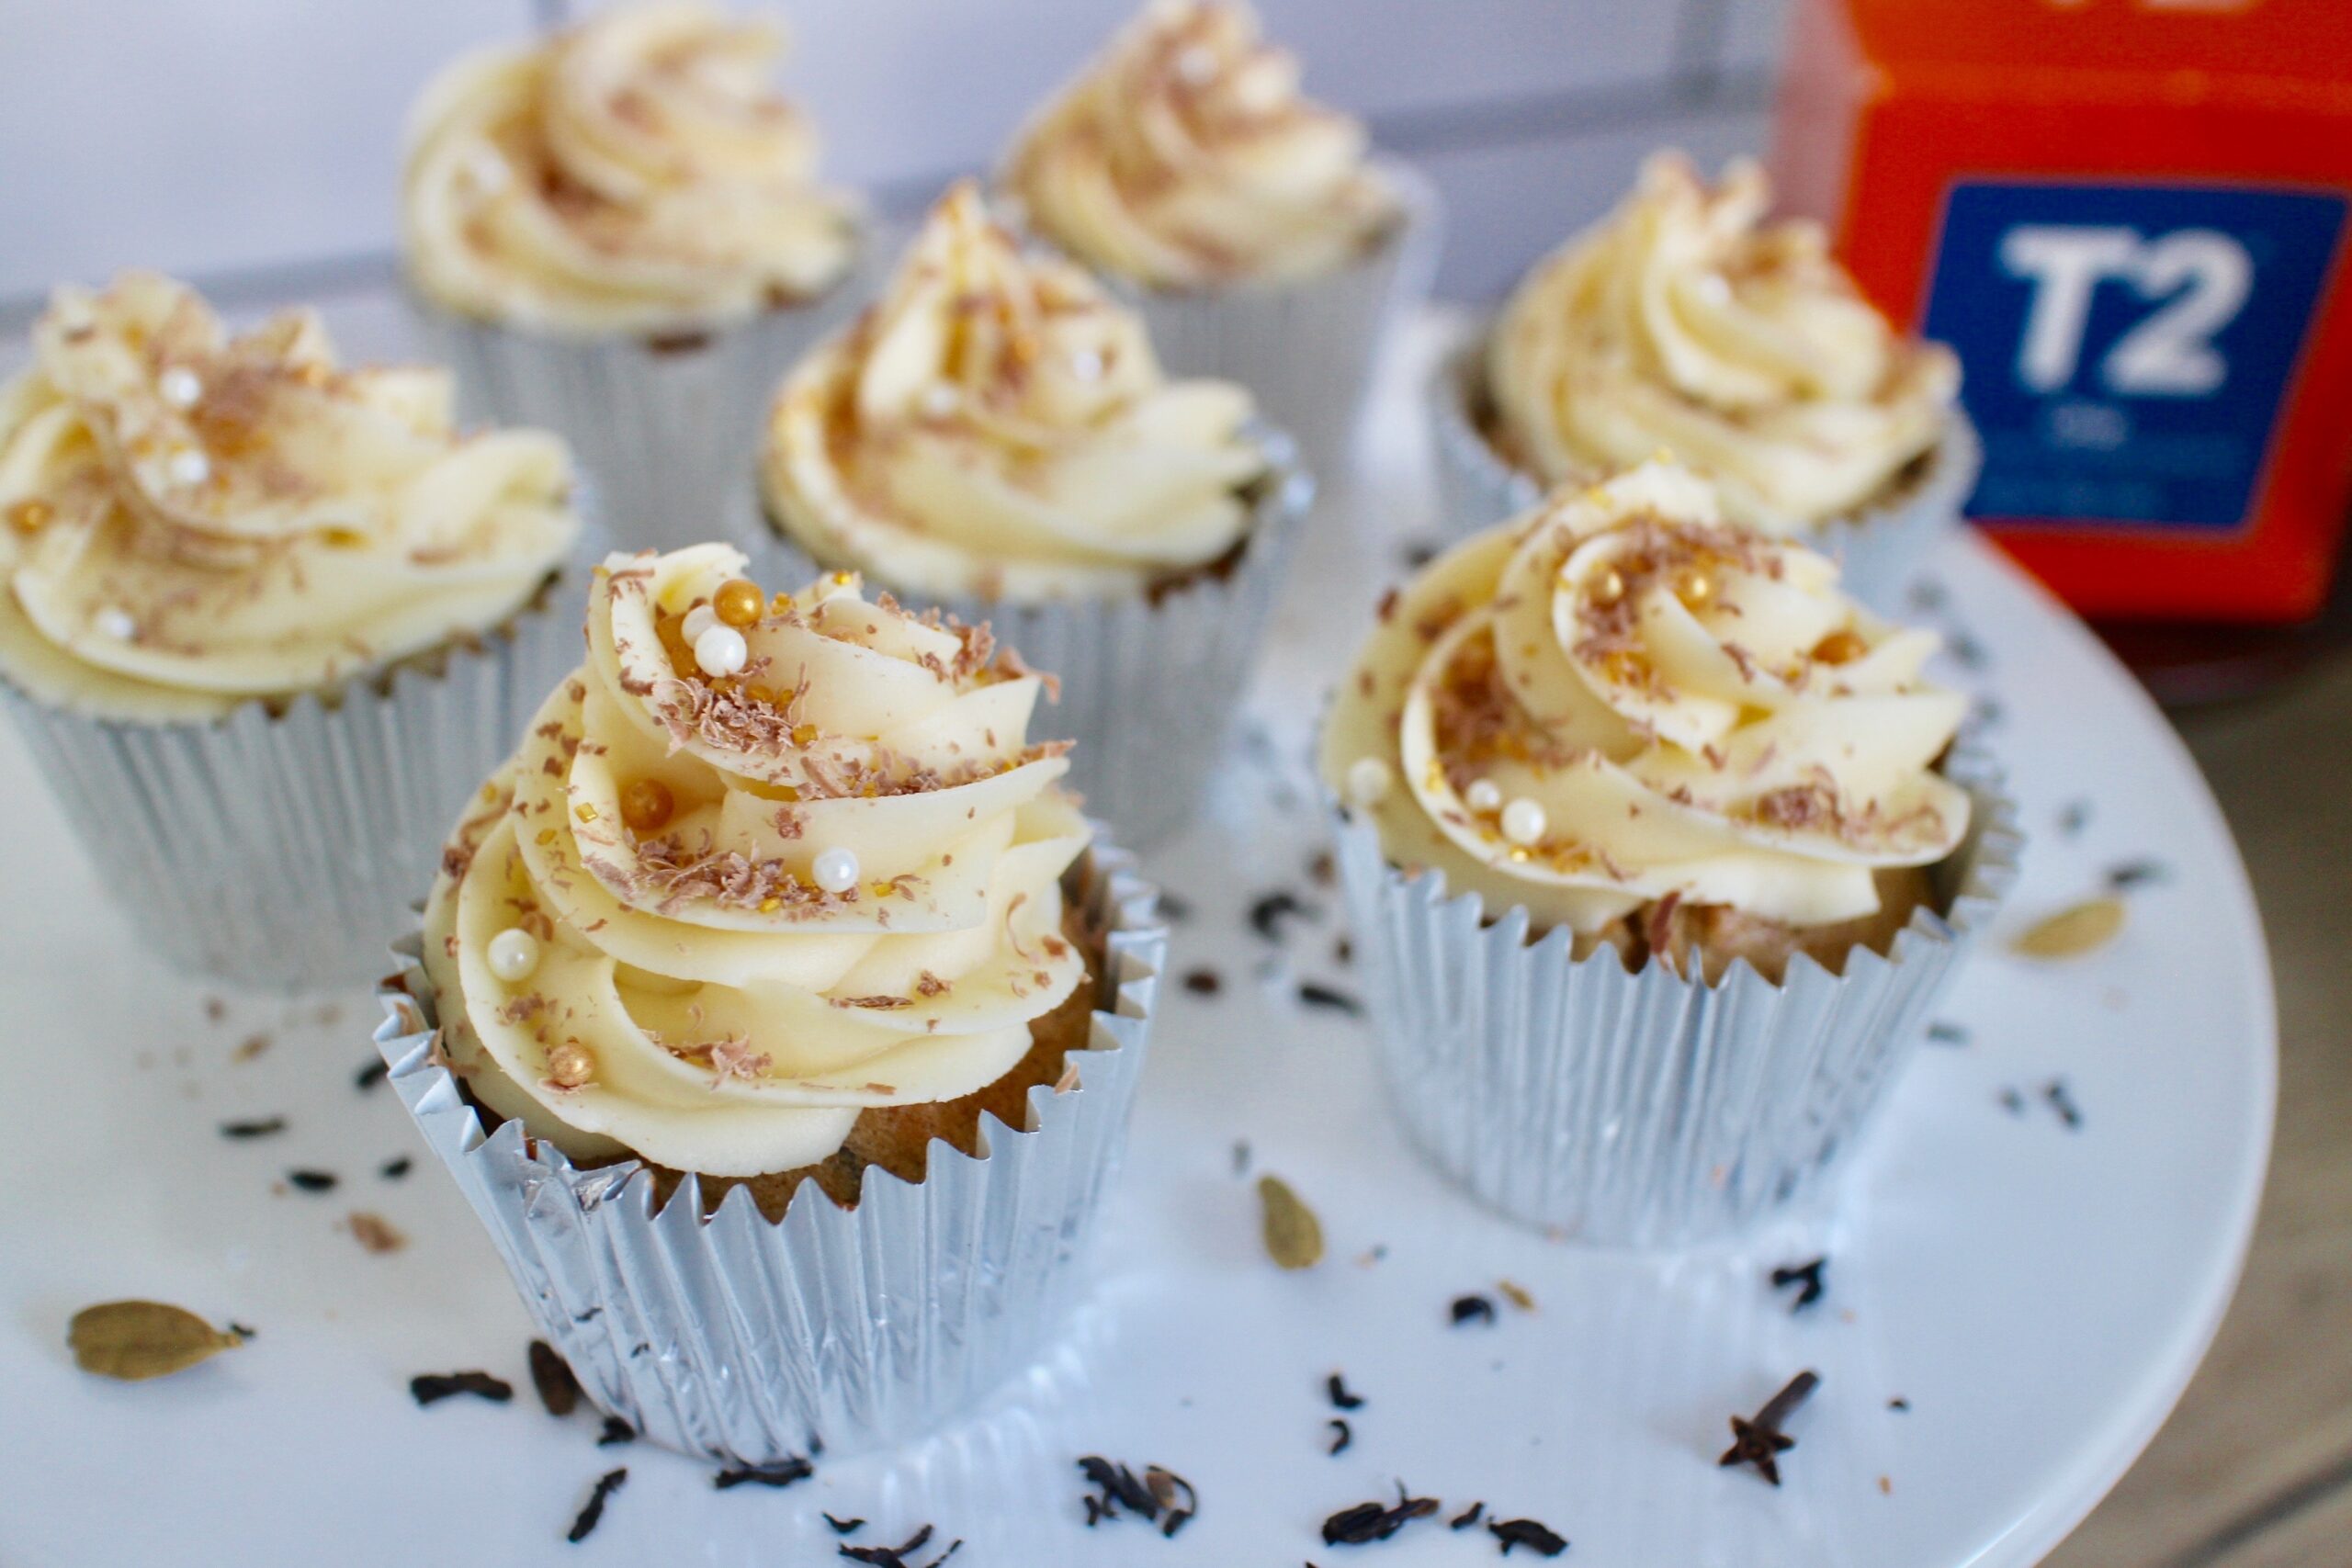 Cupcakes with buttercream frosting